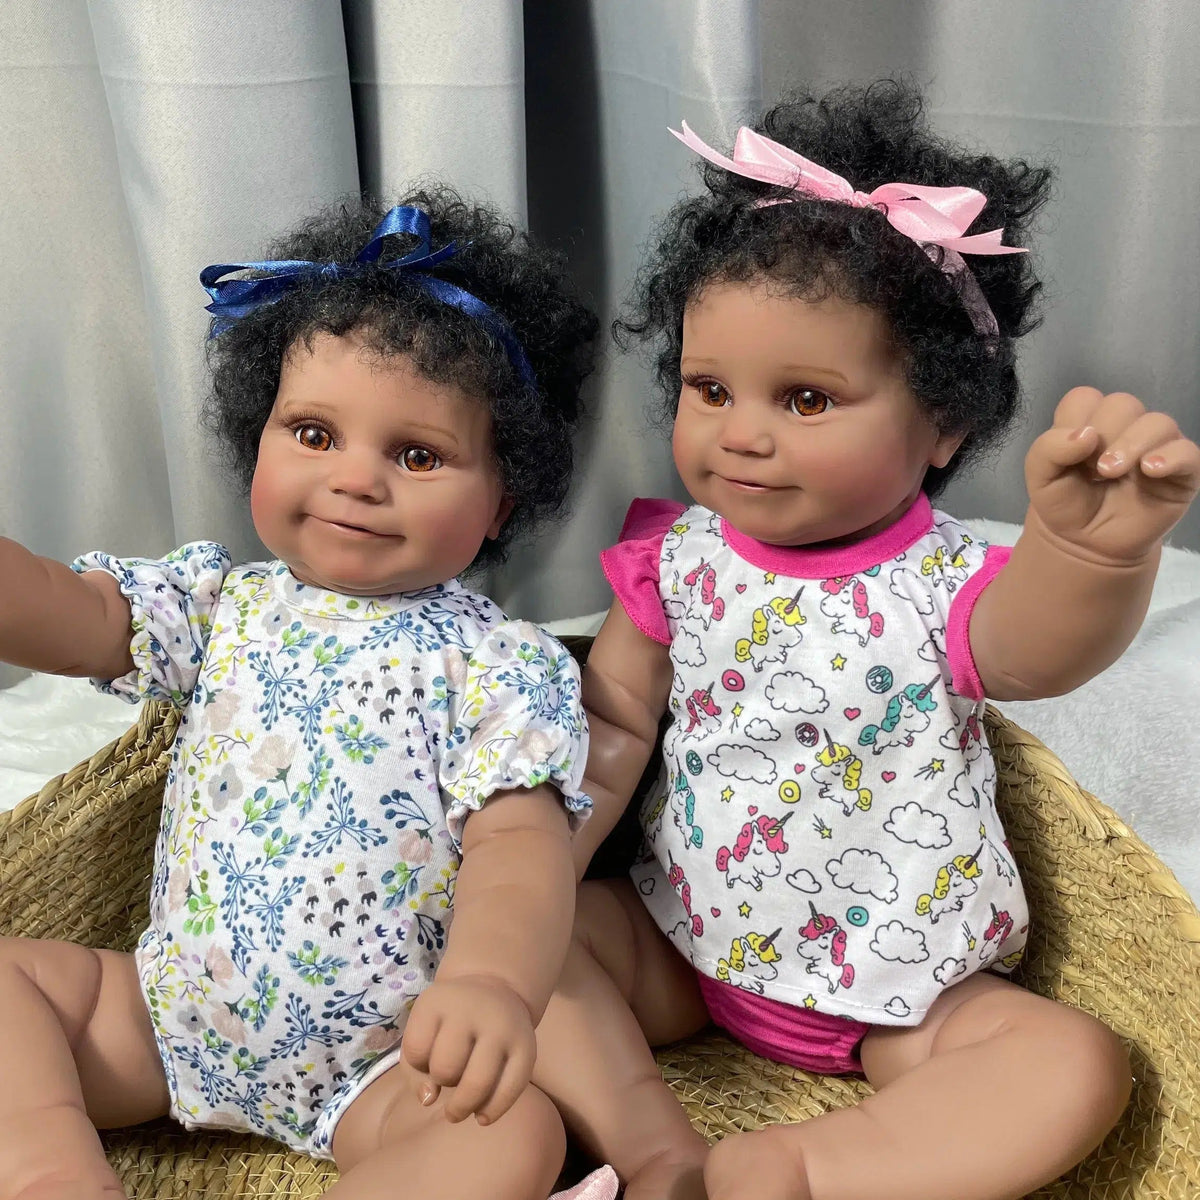 19Inch African American Doll Maddie Twins Full Silicone Vinyl Girl Washable Dark Skin Reborn Baby Handmade Rooted Hair Toy Gift-Maternity Miracles - Mom & Baby Gifts